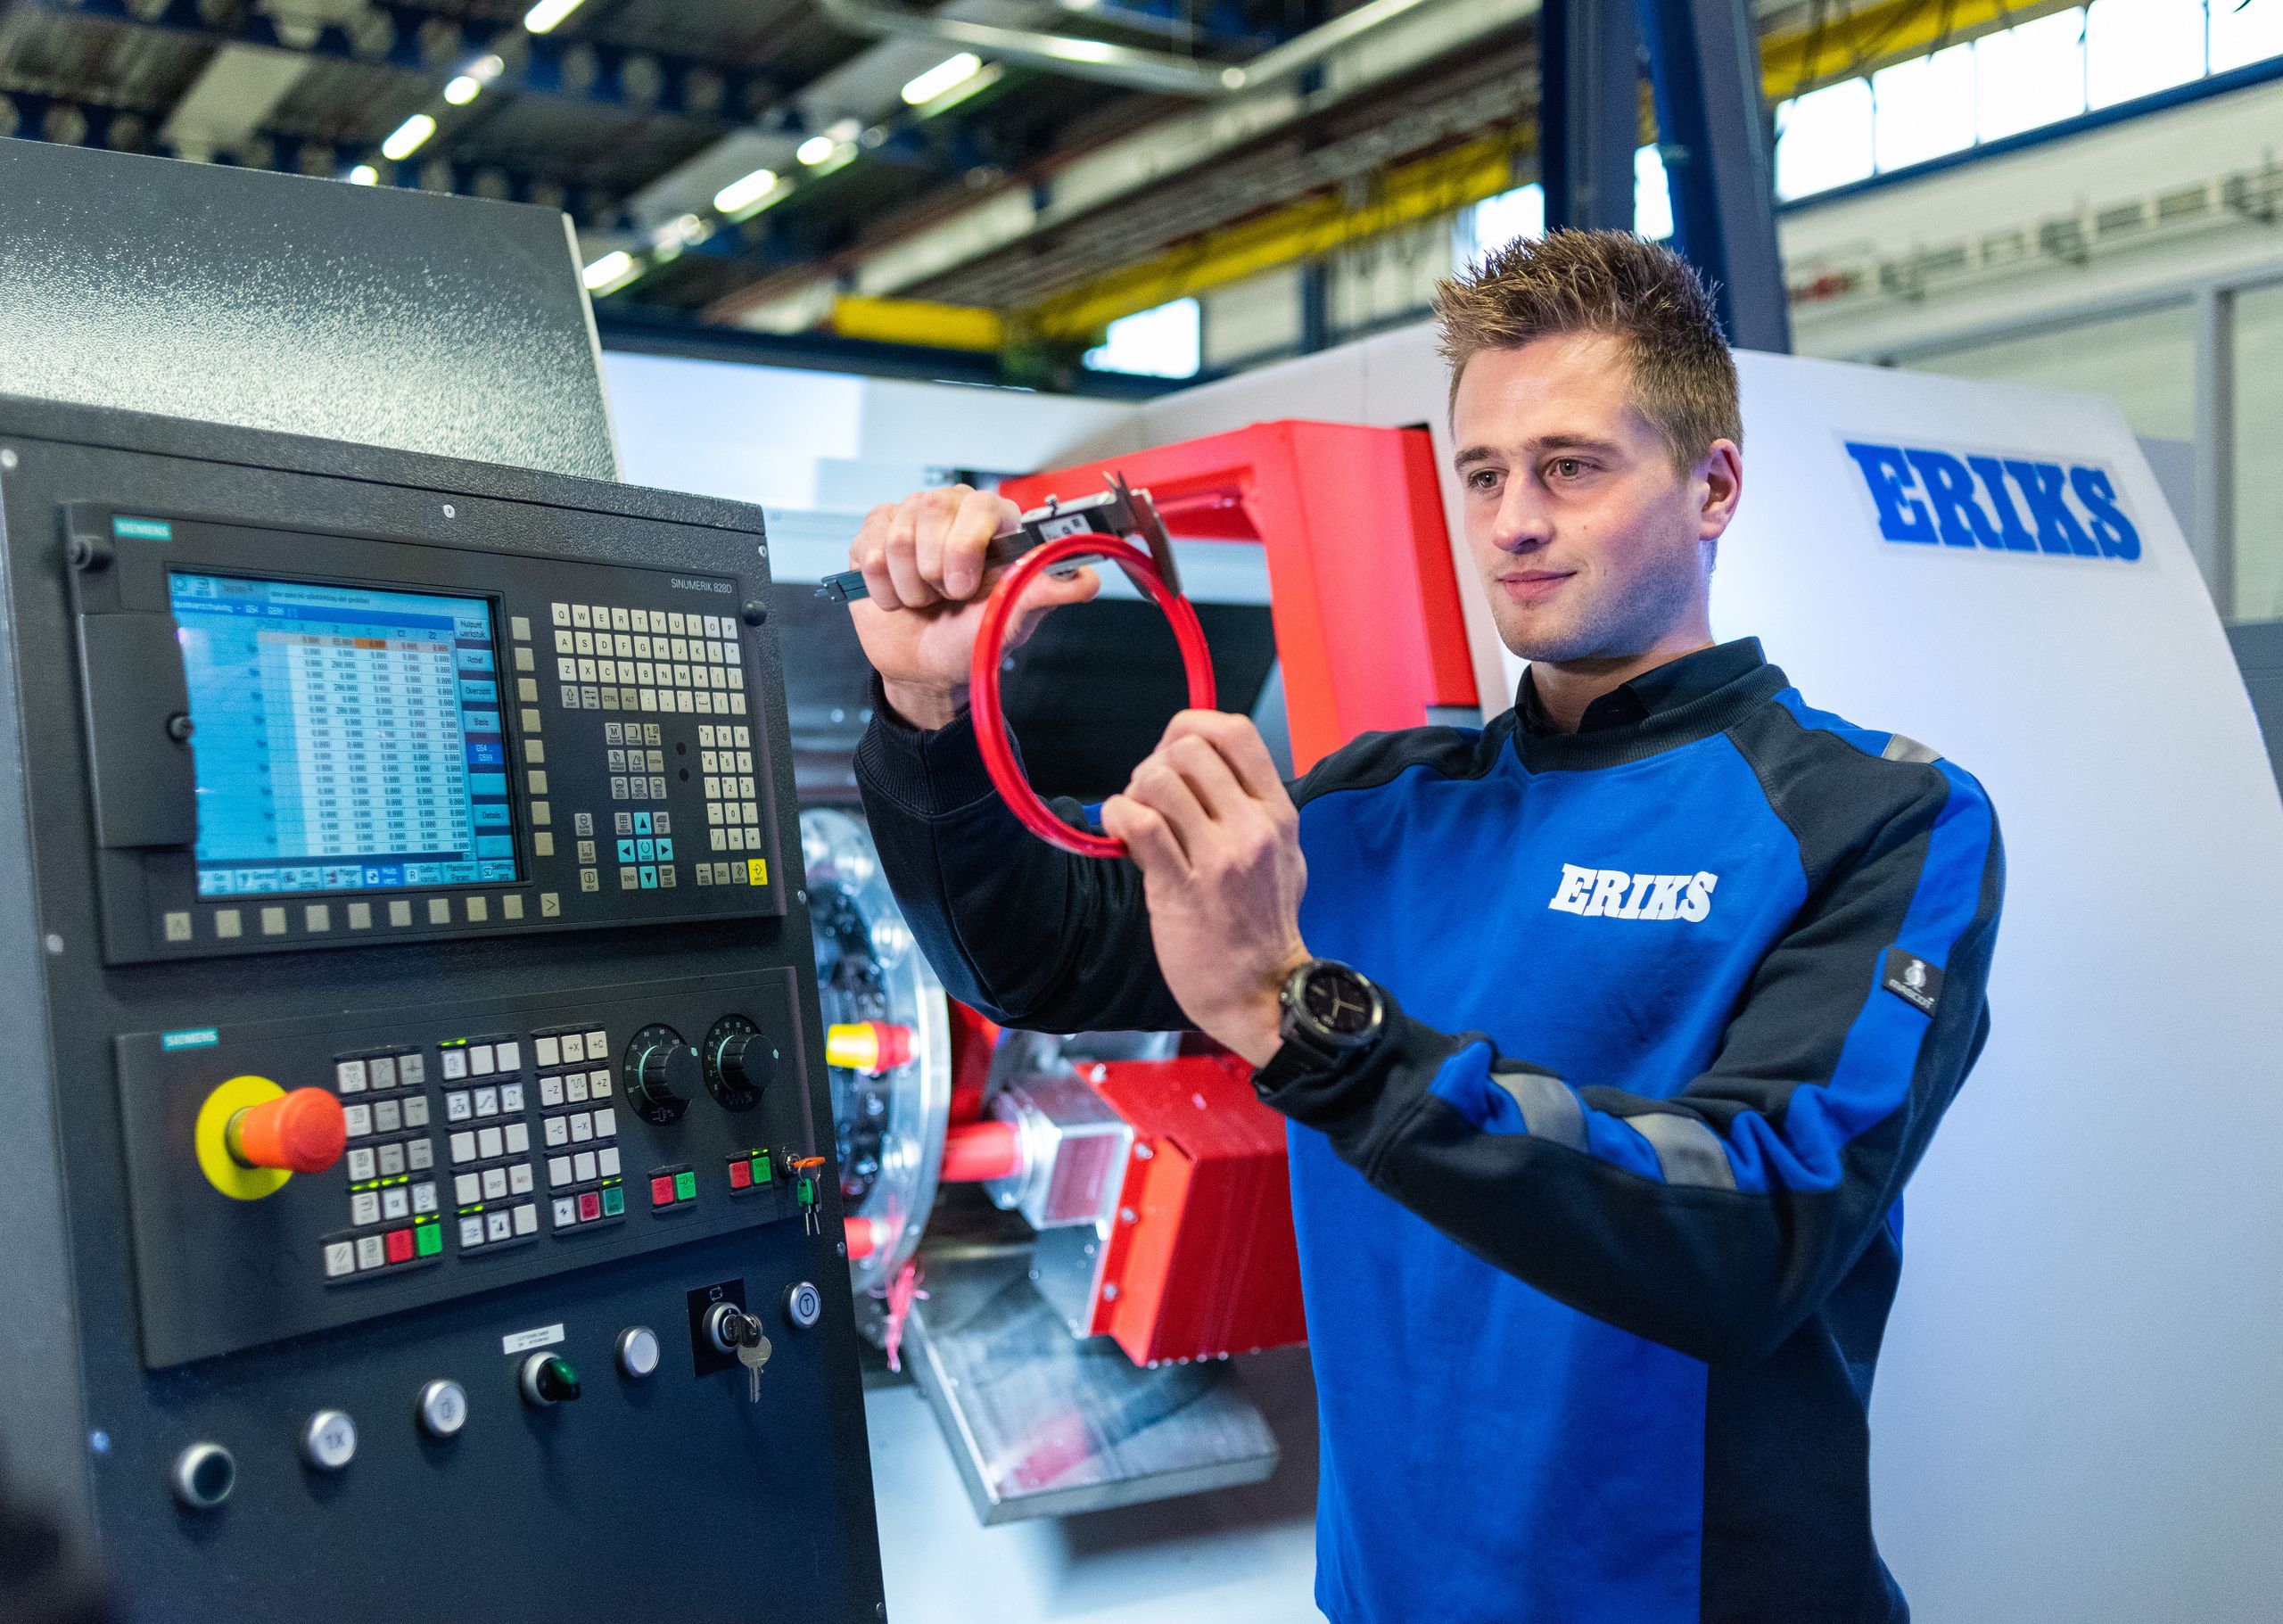 ERIKS employee working on the tailor-made gaskets produced in Alkmaar, 2022.